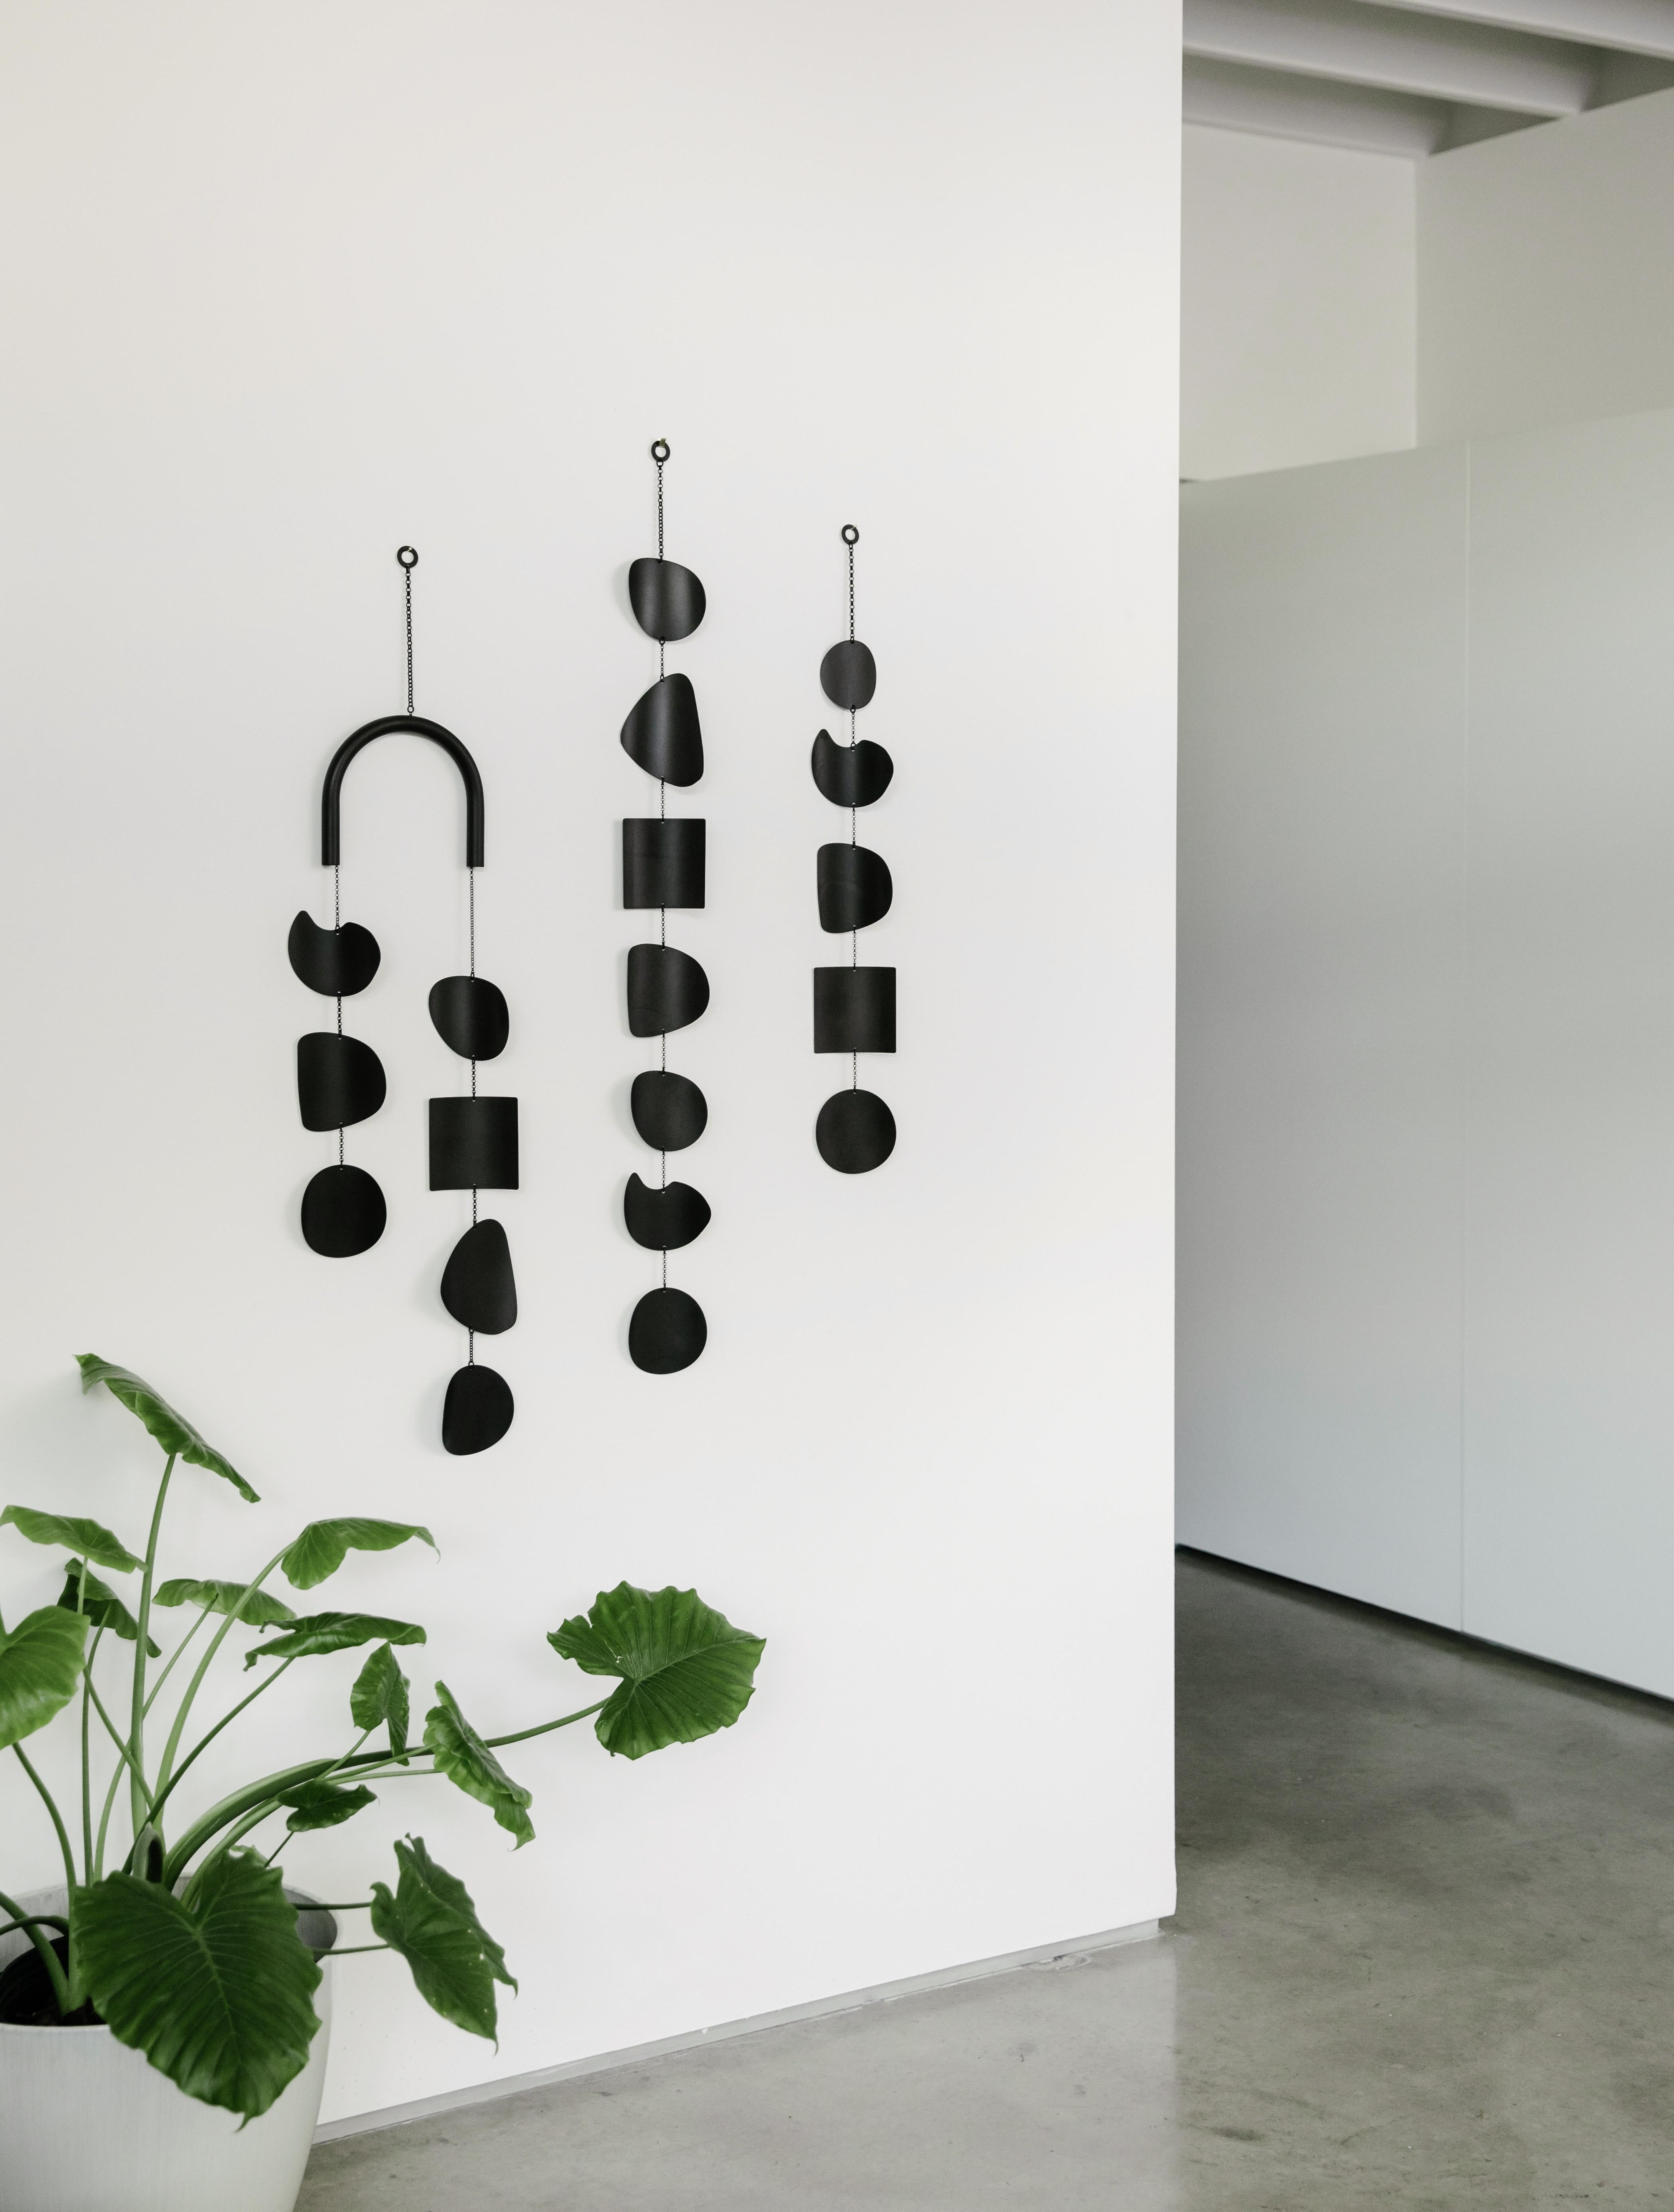 The Quarry Wall Hanging draws inspiration from the worn shapes of river rocks. The curved bar adds a layer of softness and the form of the organic shapes creates inviting dimension, accentuated by the striking black patina finish of this singular